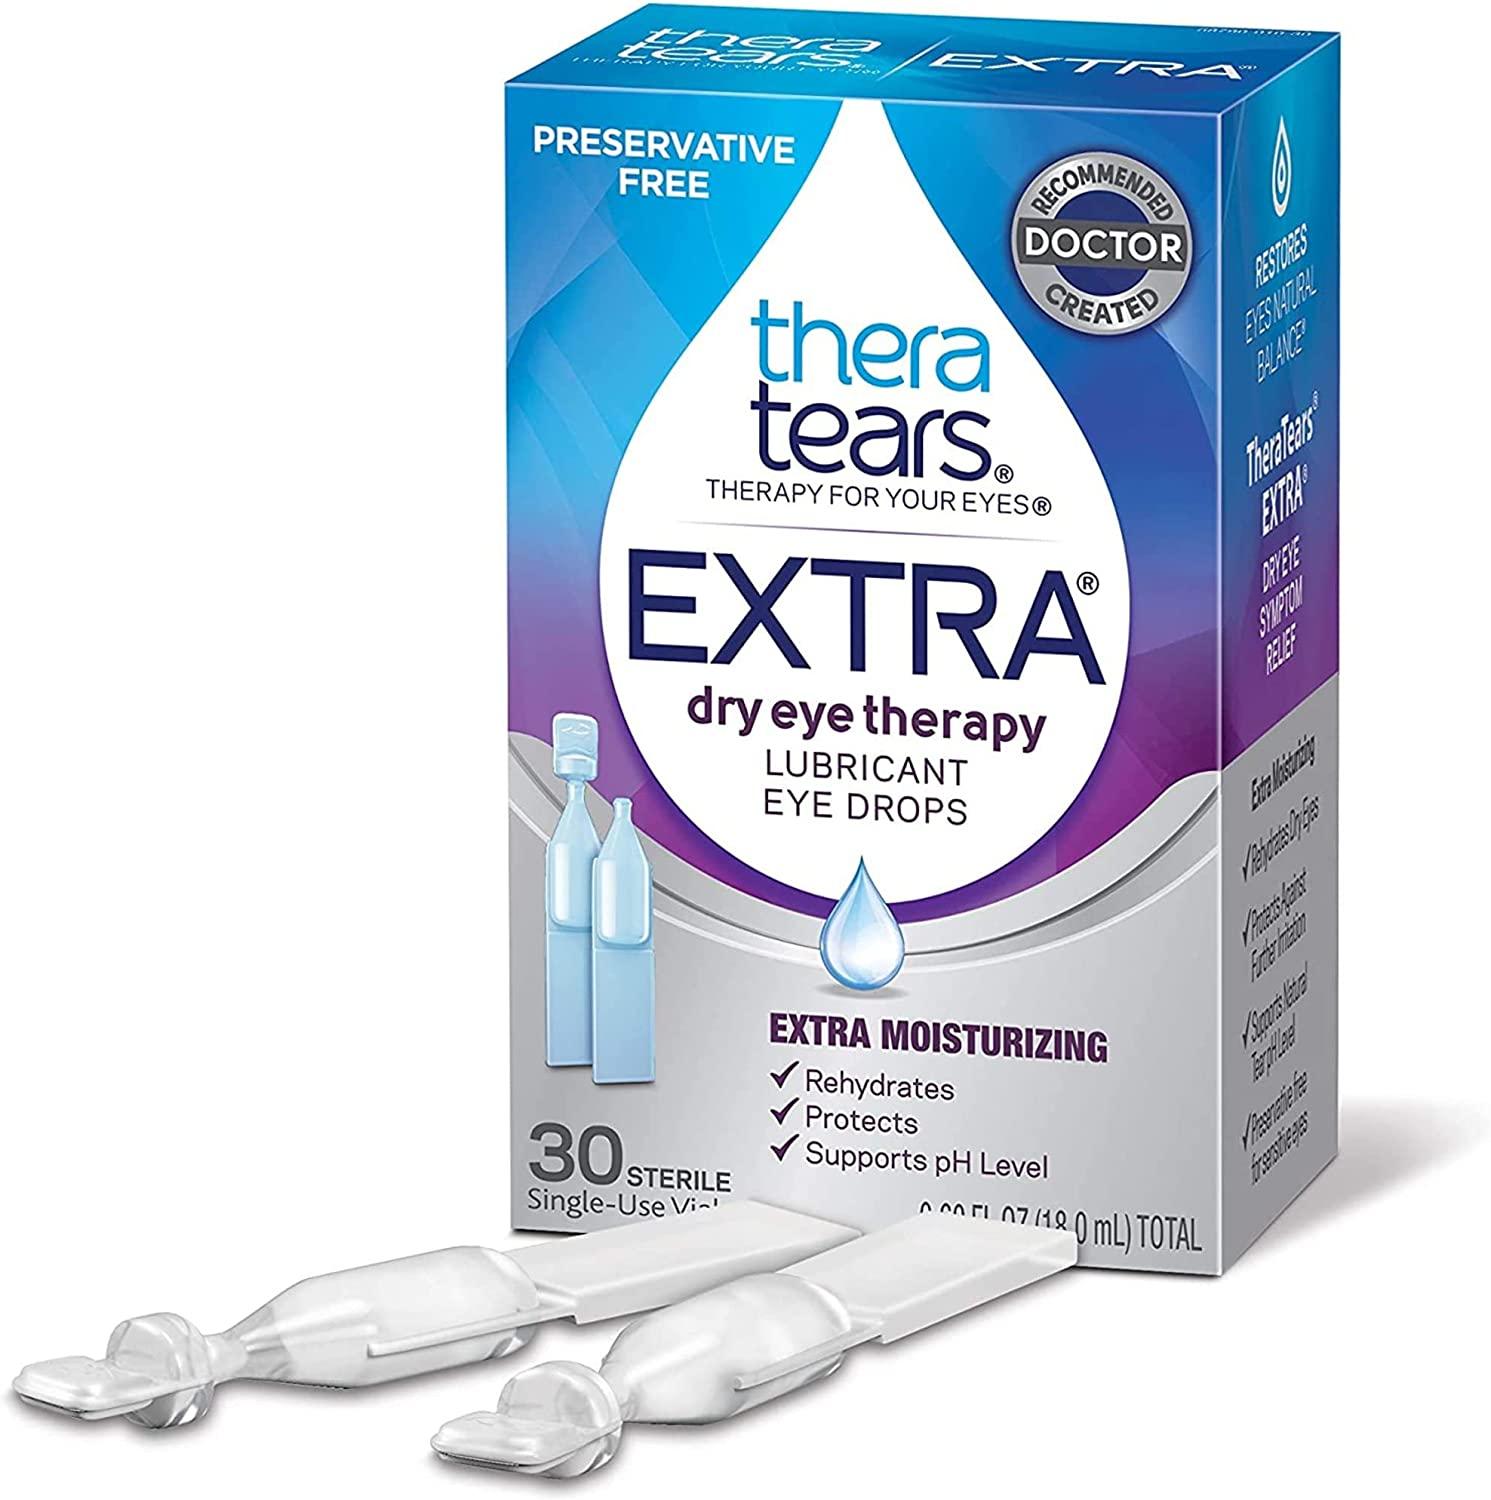 TheraTears Extra Dry Eye Therapy Lubricant Eye Drops Preservative Free